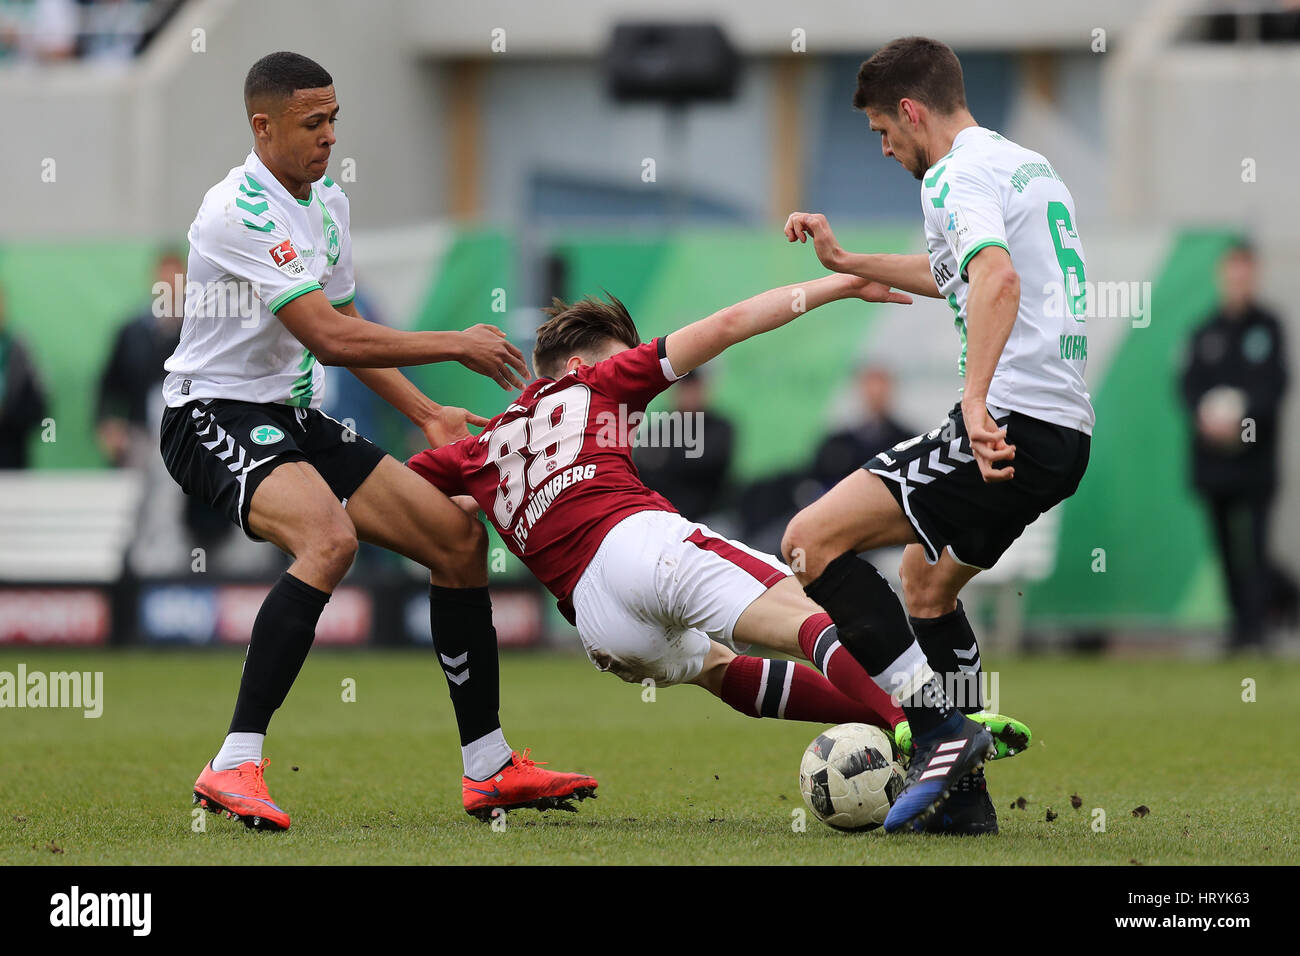 Fuerth, Germany. 5th Mar, 2017. Fuerth's Mathis Bolly (l) and Nuremberg's Andreas Hofmann (r) in action during the 2nd Bundesliga soccer match between SpVgg Greuther Fuerth and 1. FC Nuremberg at the Stadion am Laubenweg in Fuerth, Germany, 5 March 2017. (EMBARGO CONDITIONS - ATTENTION: Due to the accreditation guidlines, the DFL only permits the publication and utilisation of up to 15 pictures per match on the internet and in online media during the match.) Photo: Daniel Karmann/dpa/Alamy Live News Stock Photo